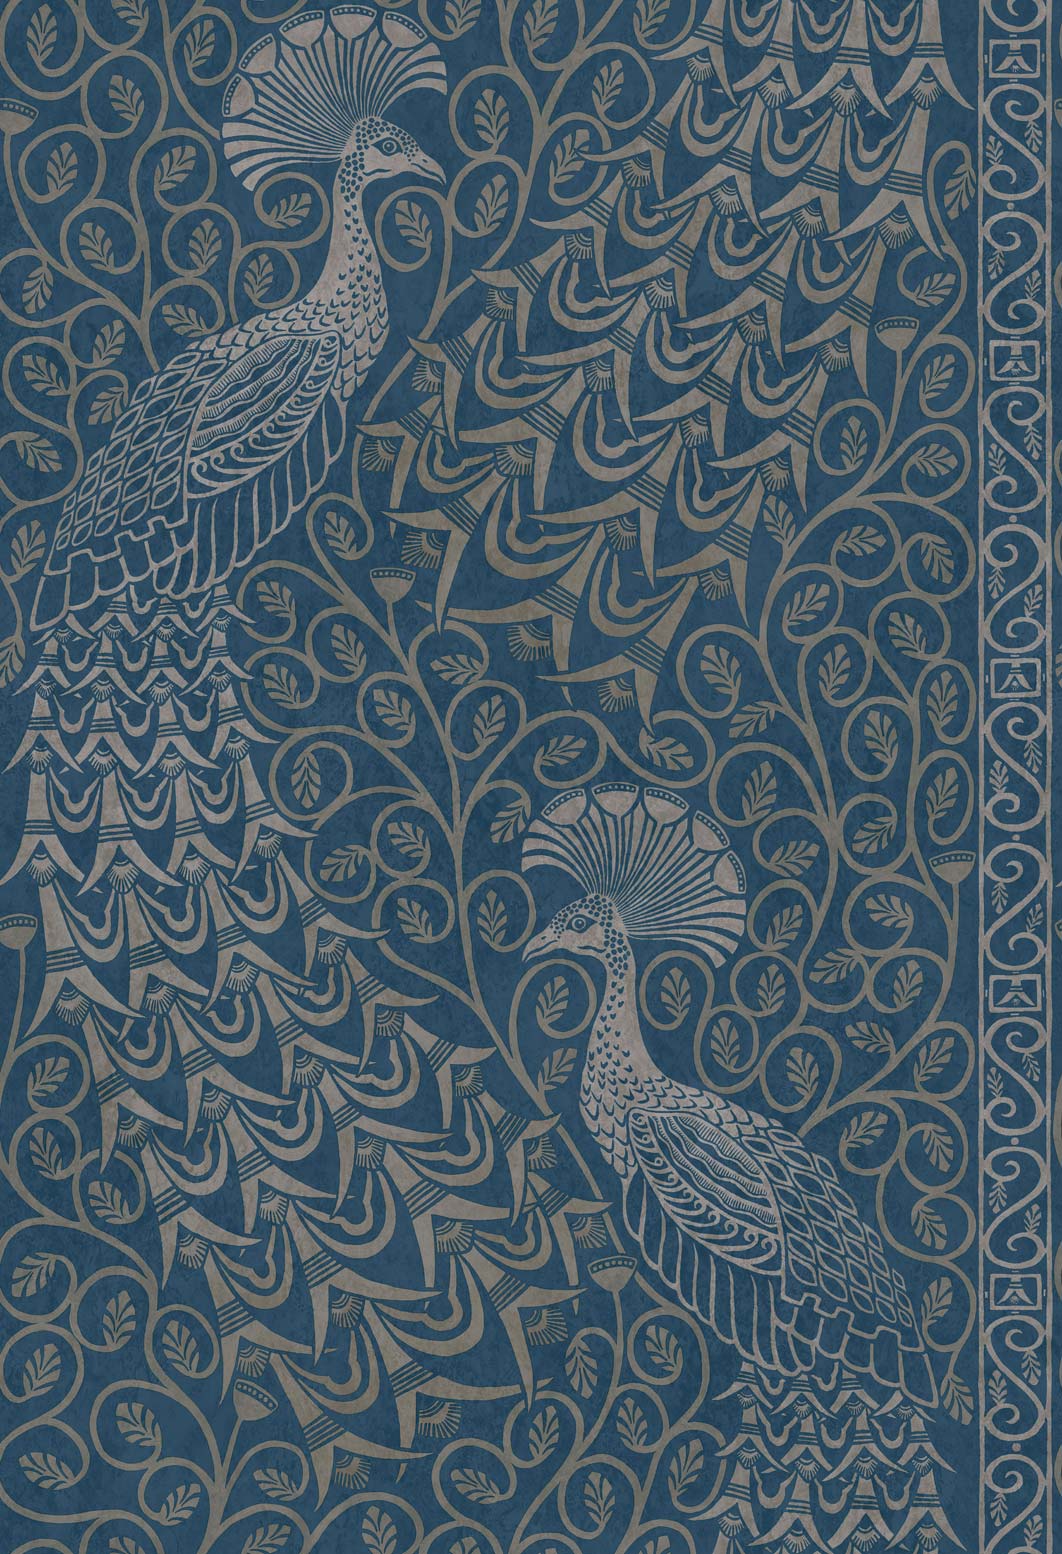 Wallpaper - Cole and Son - Pearwood - Pavo Parade - Metallic Silver on Denim